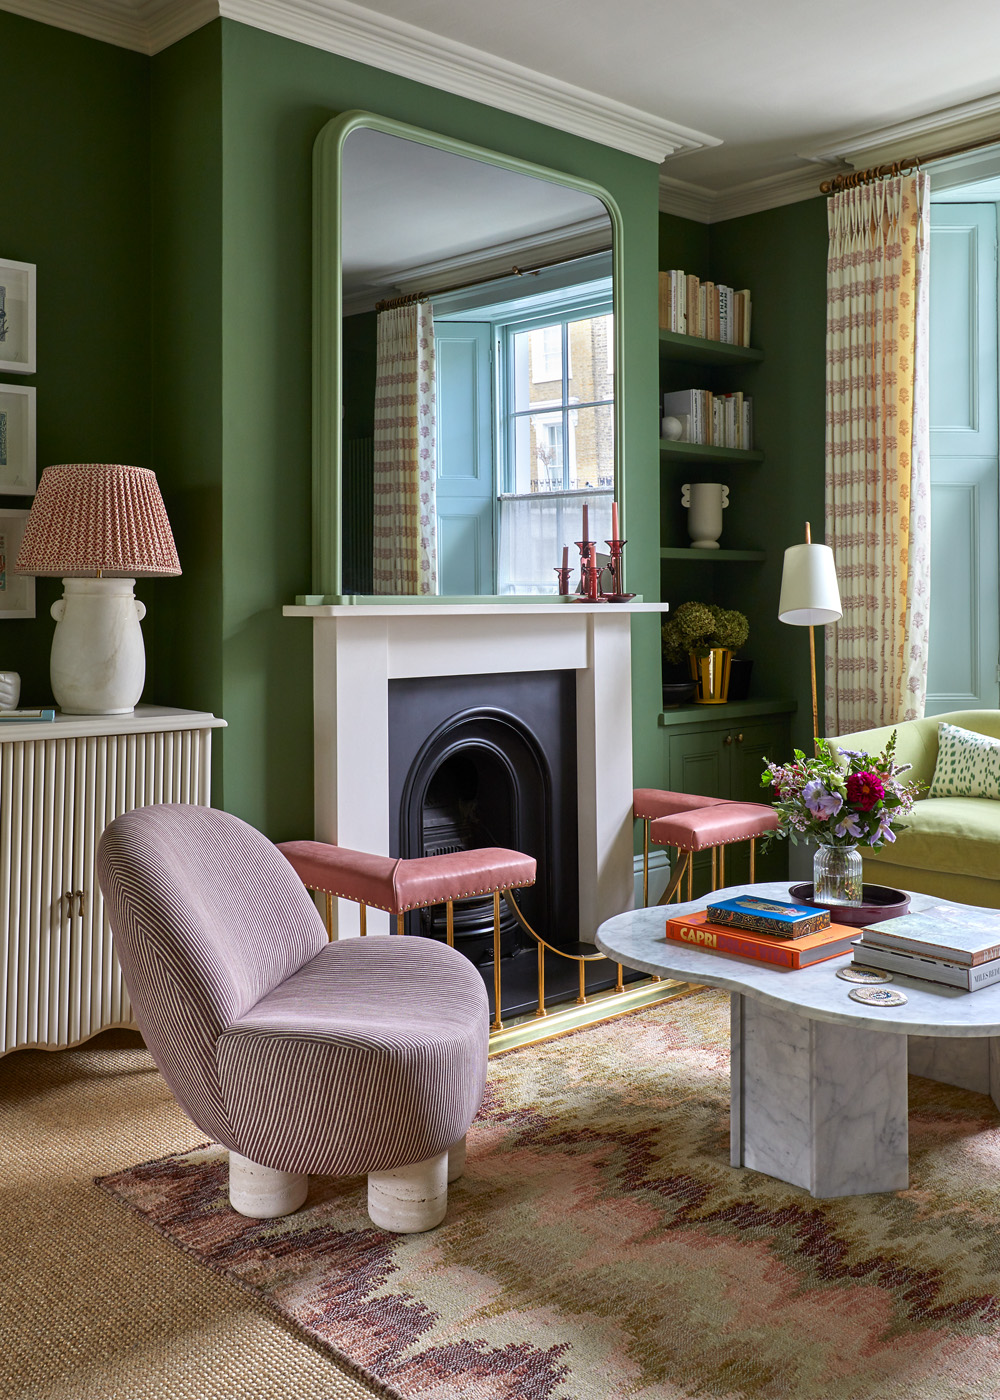 Fireplace in a green-painted living room